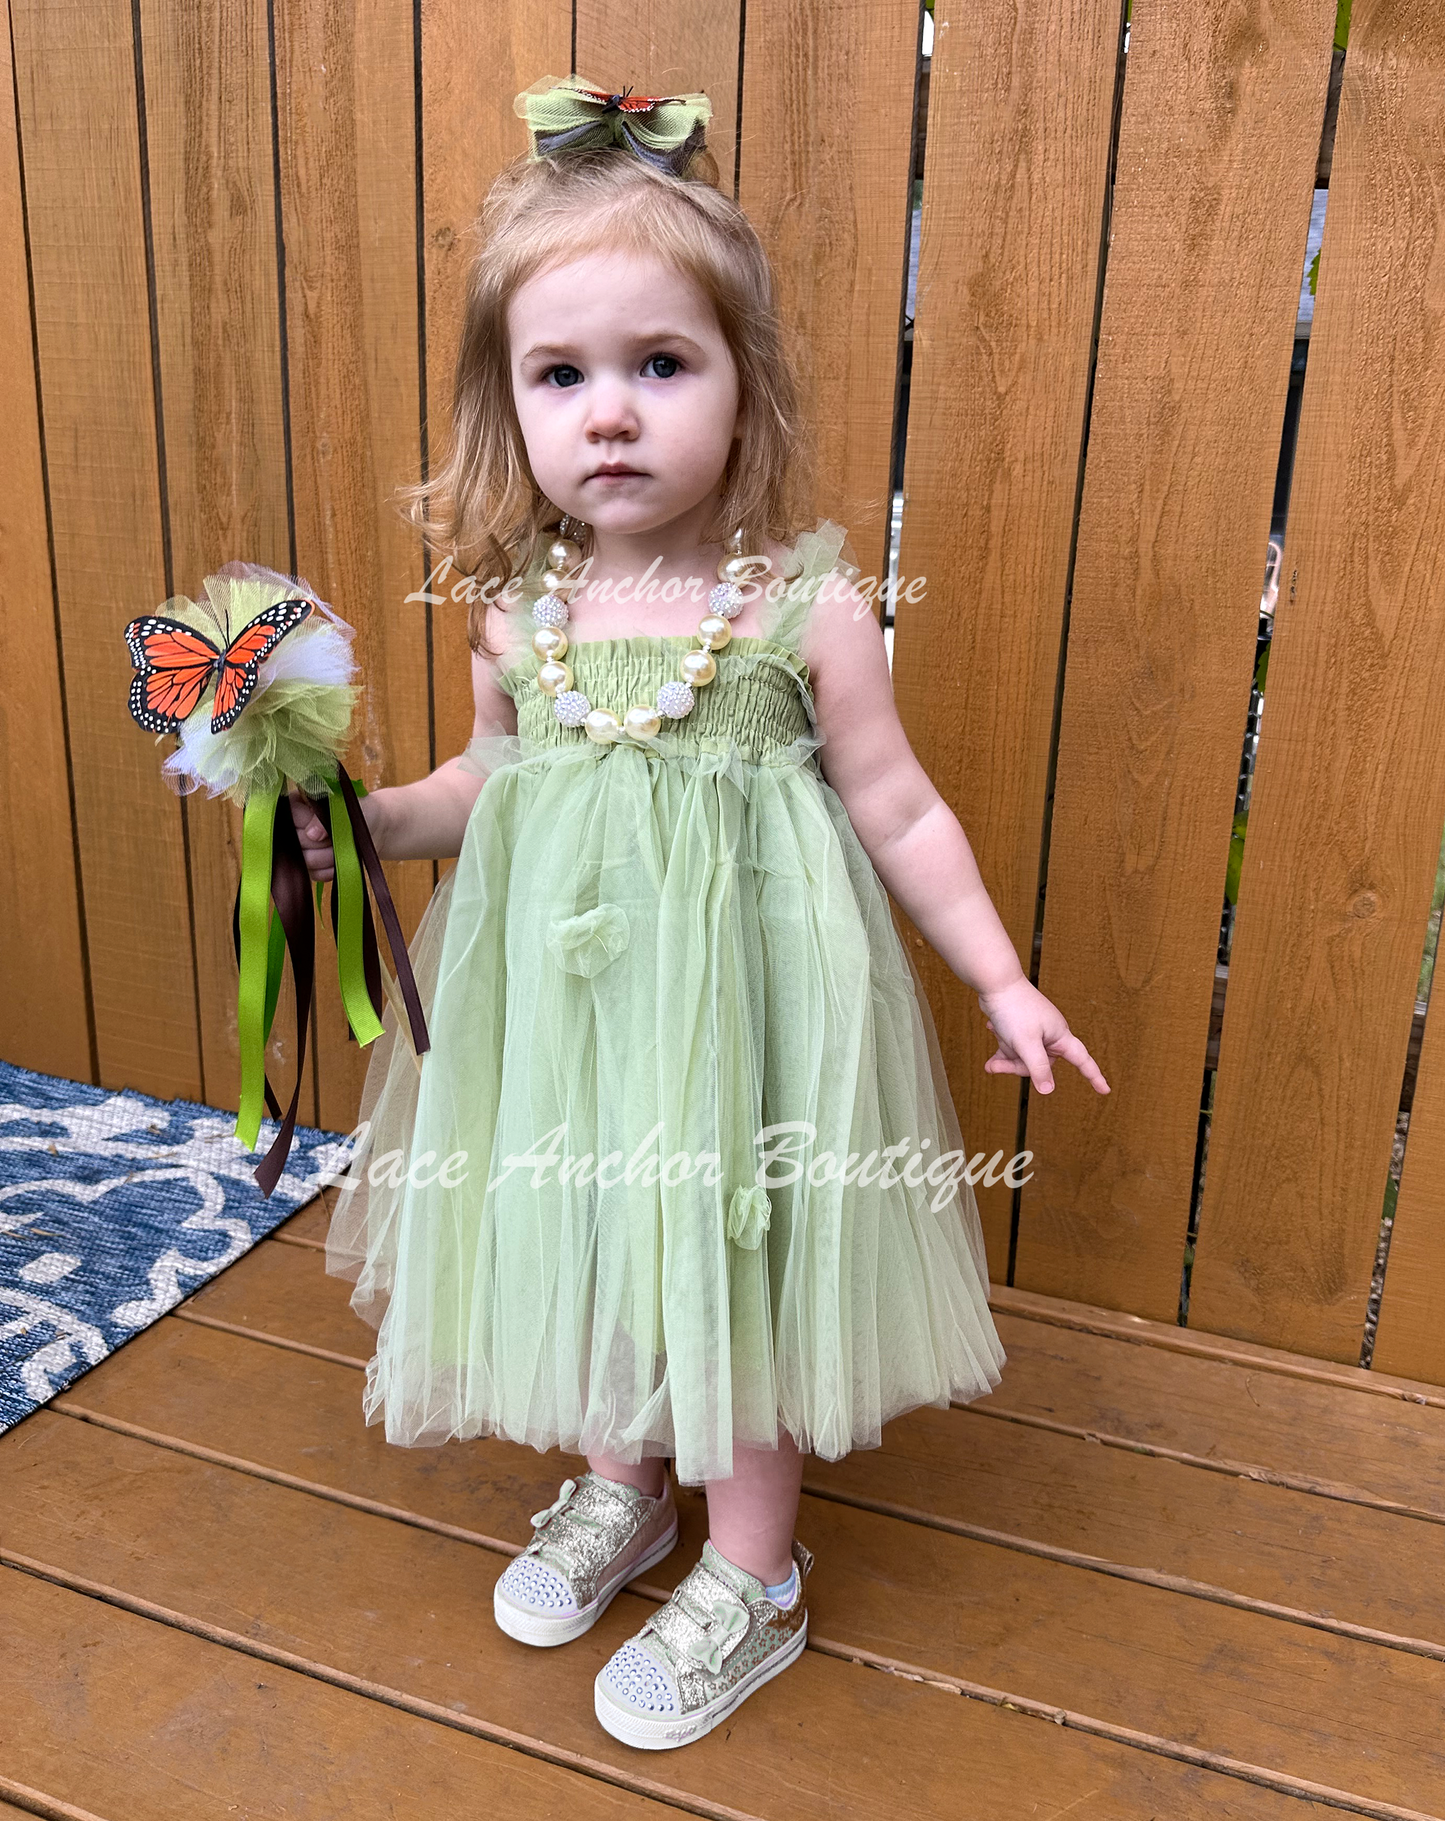 Sage Green tulle fairy girls dress with smocked top and tulle flowers on skirt. Attached butterfly wings and ruffled straps. Worn by toddler model.